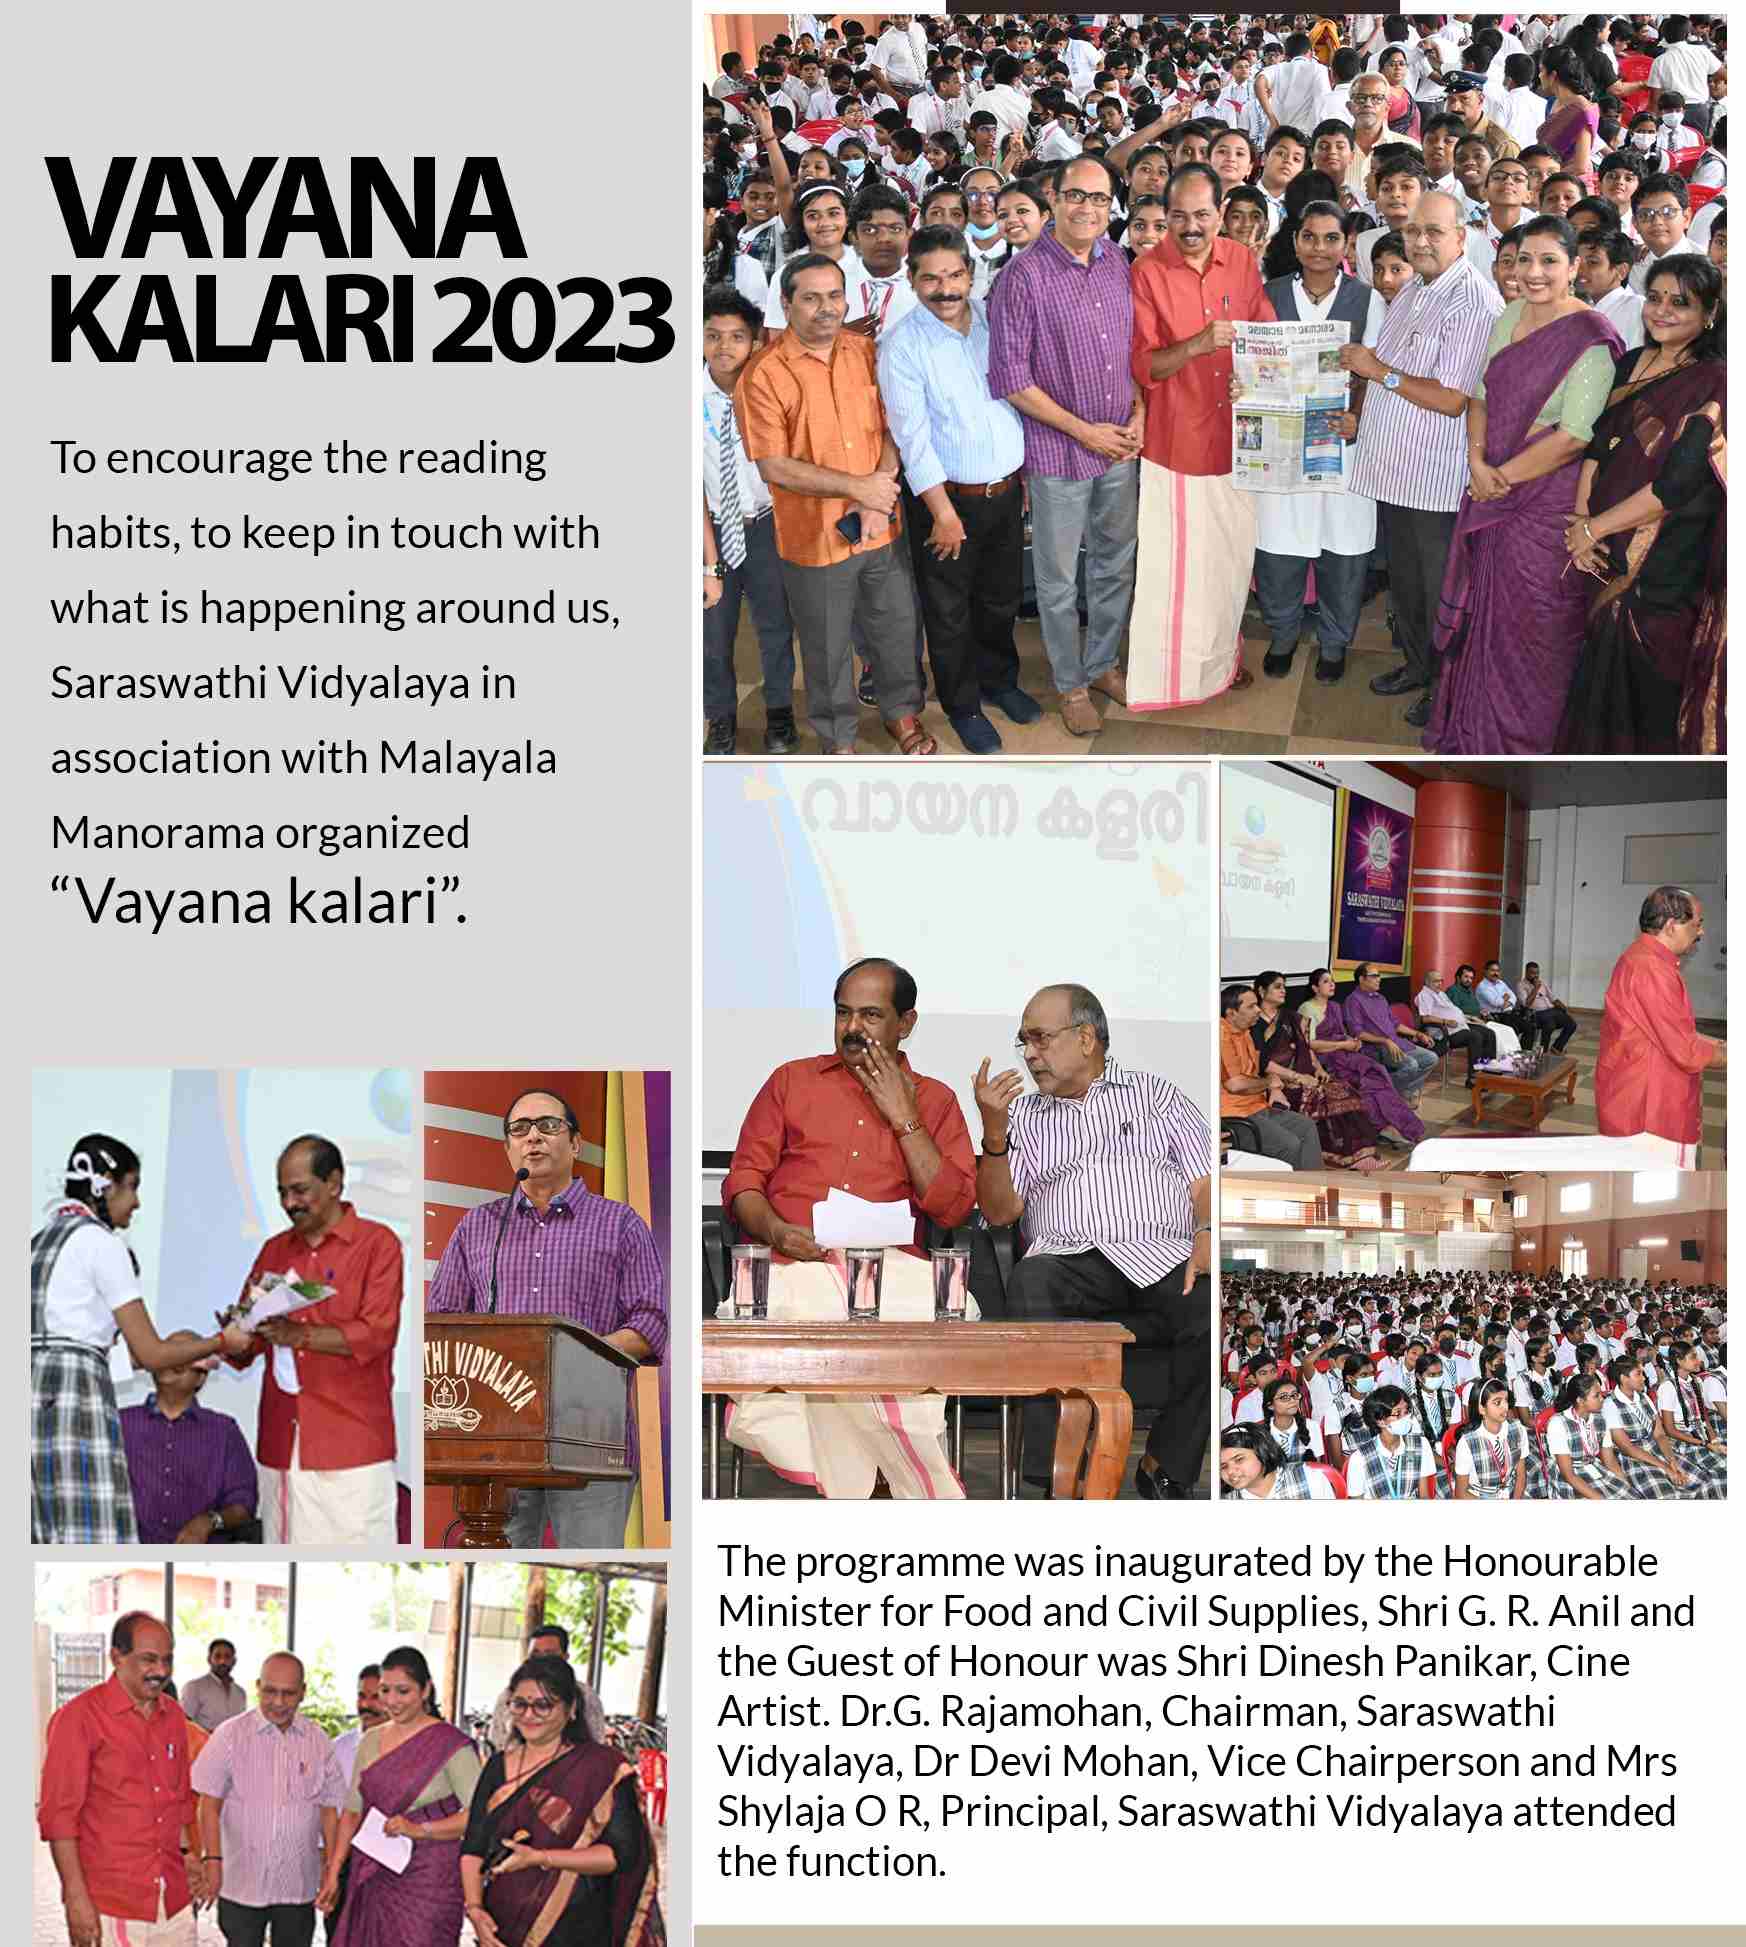 “Vayana kalari” inaugurated by Honourable Minister for Food and Civil Supplies, Shri G. R. Anil